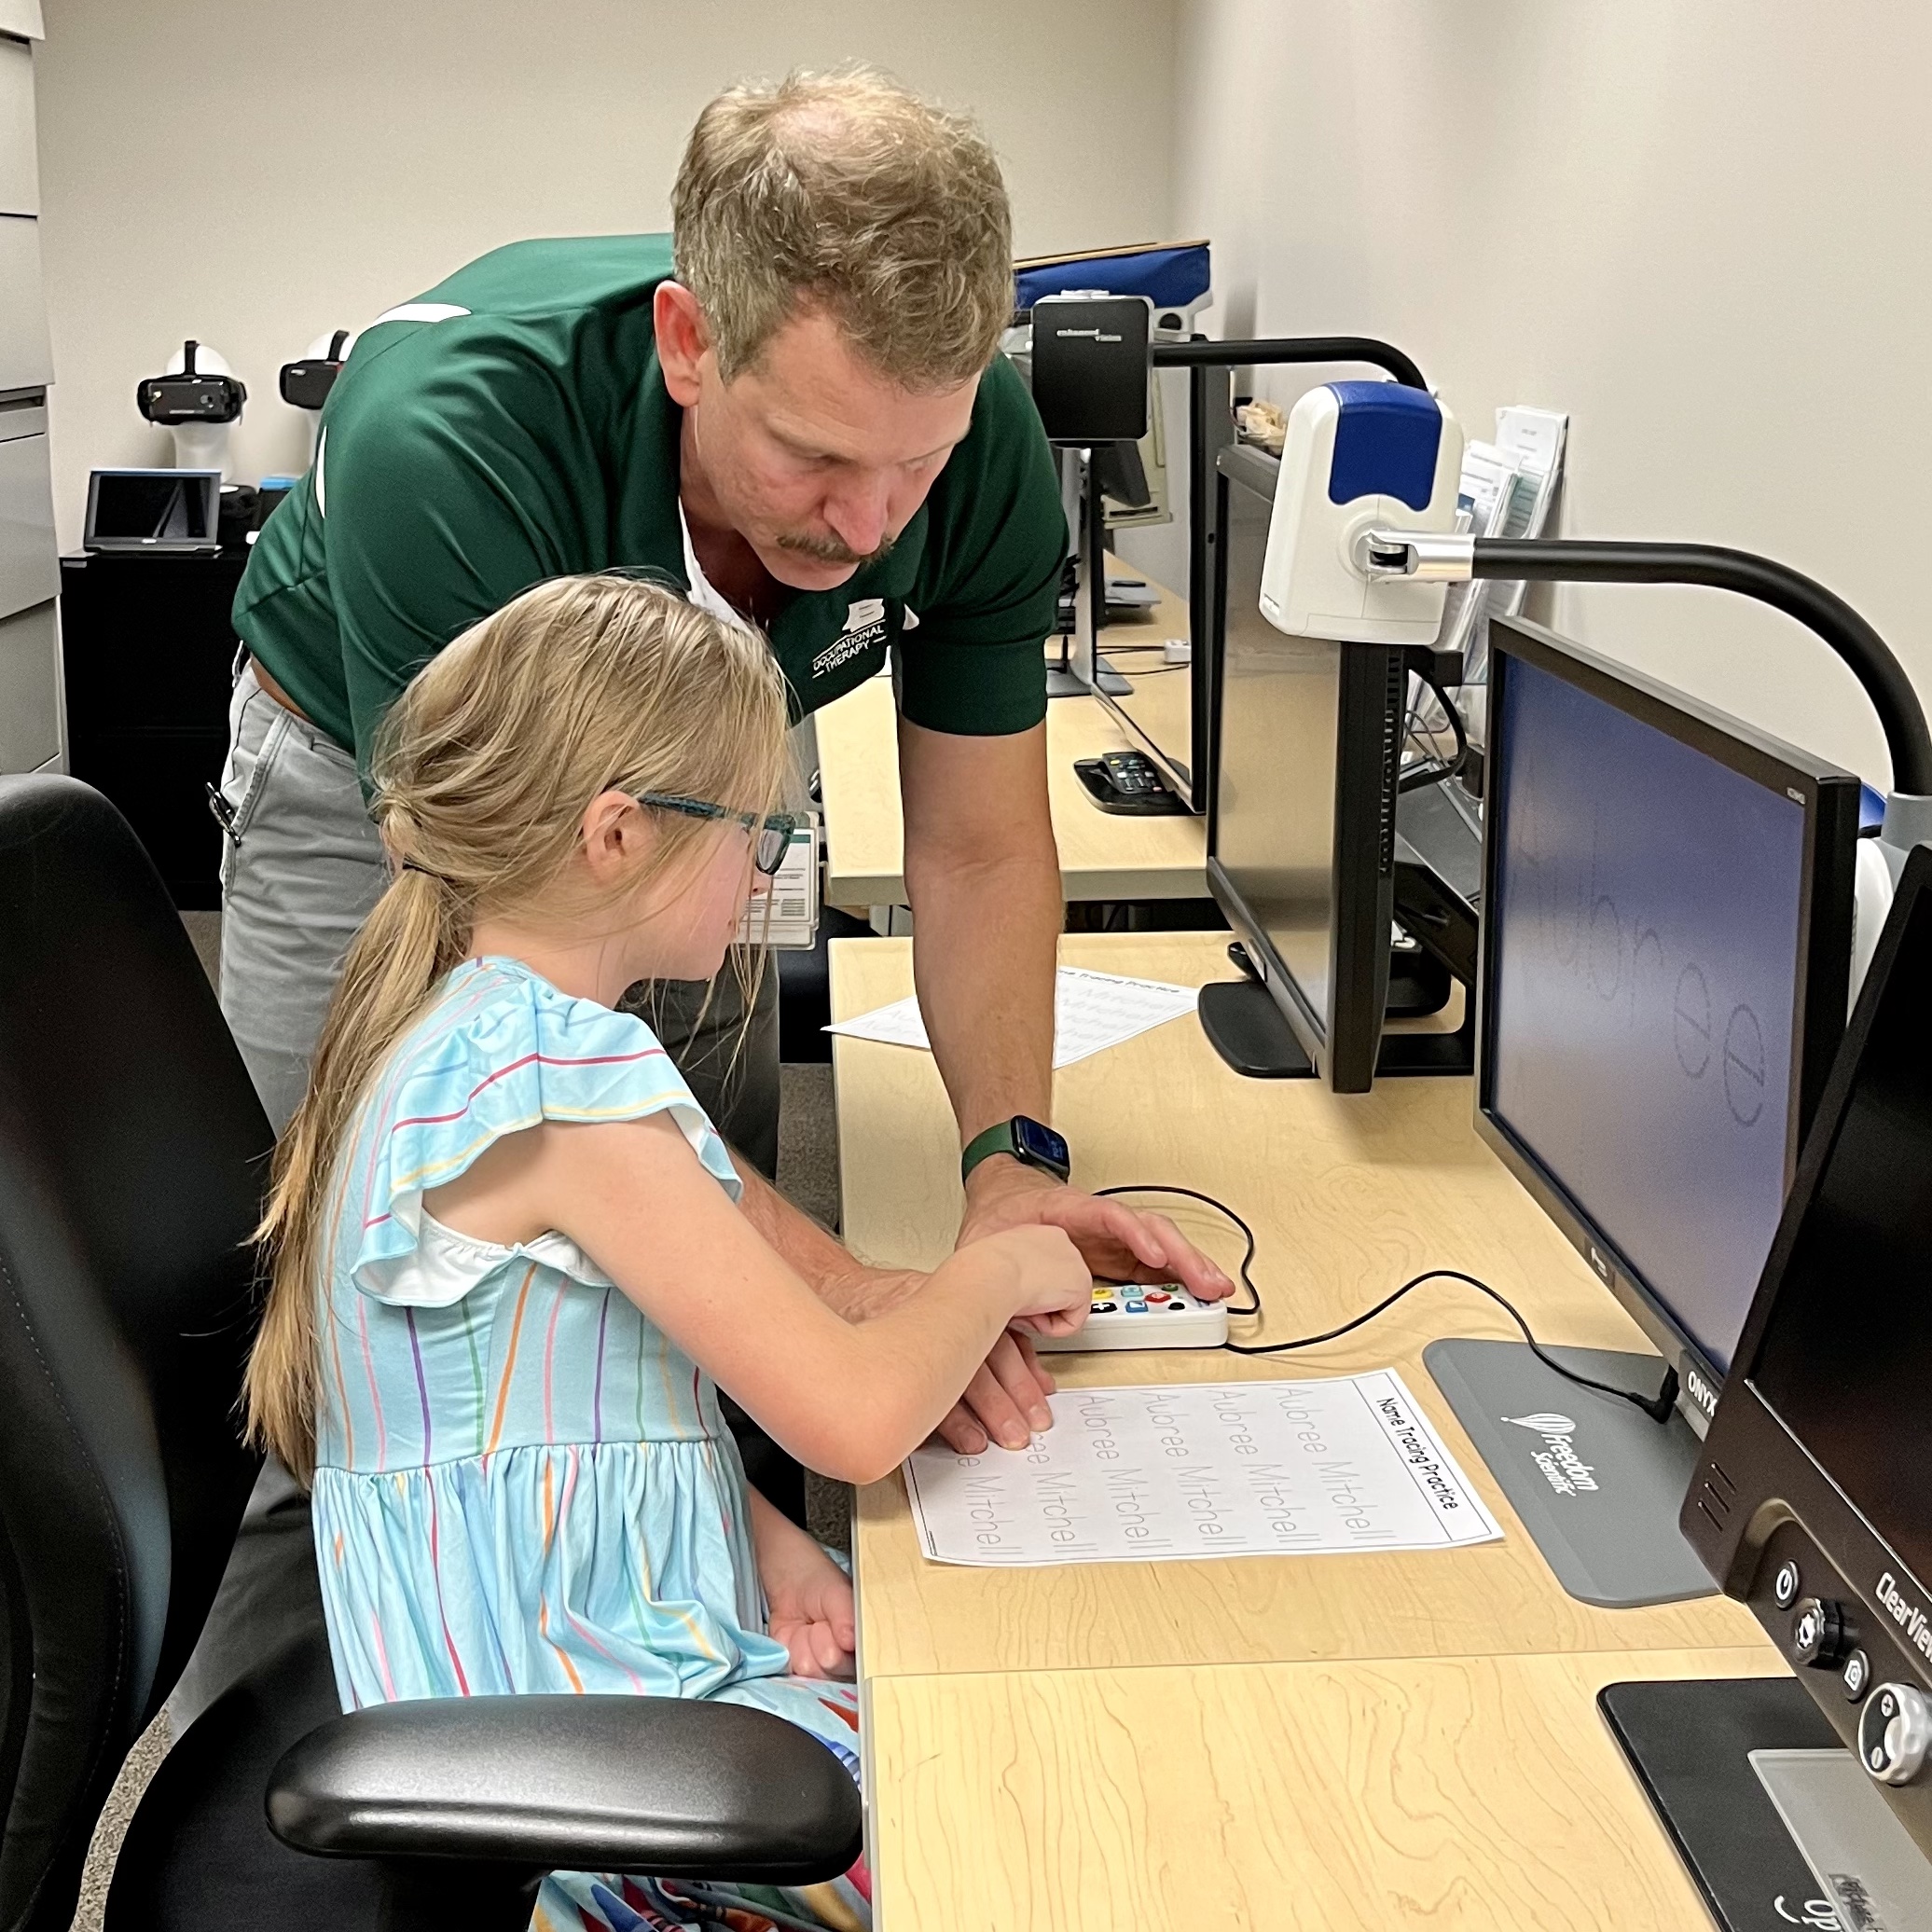 Aubree Mitchel receives training from Jason Vice, Ph.D. on her new vision aid.